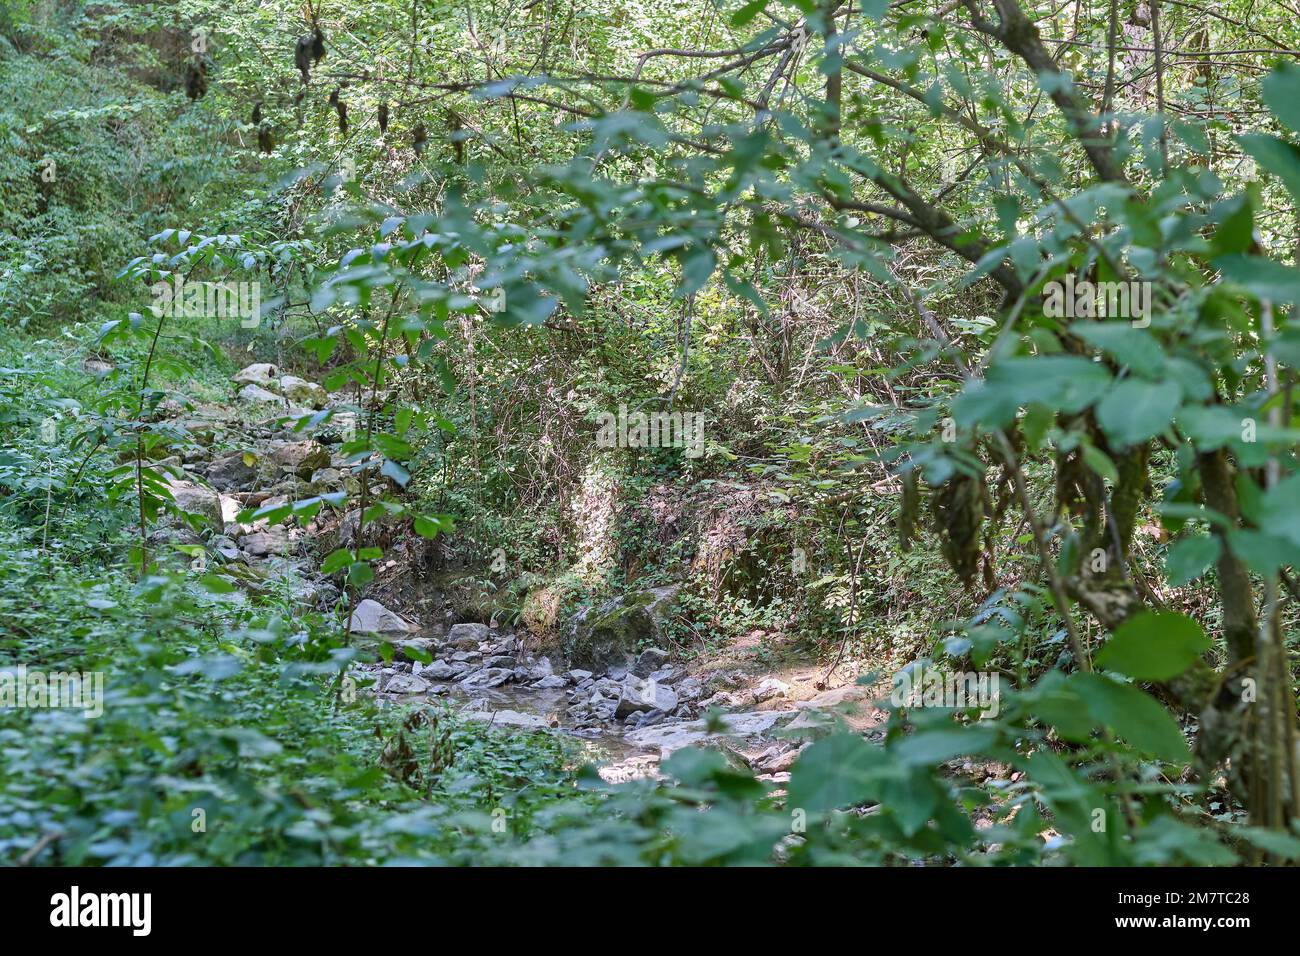 Leafy forest with bushes around and in the center some rocks with a small river passing by with little water Stock Photo